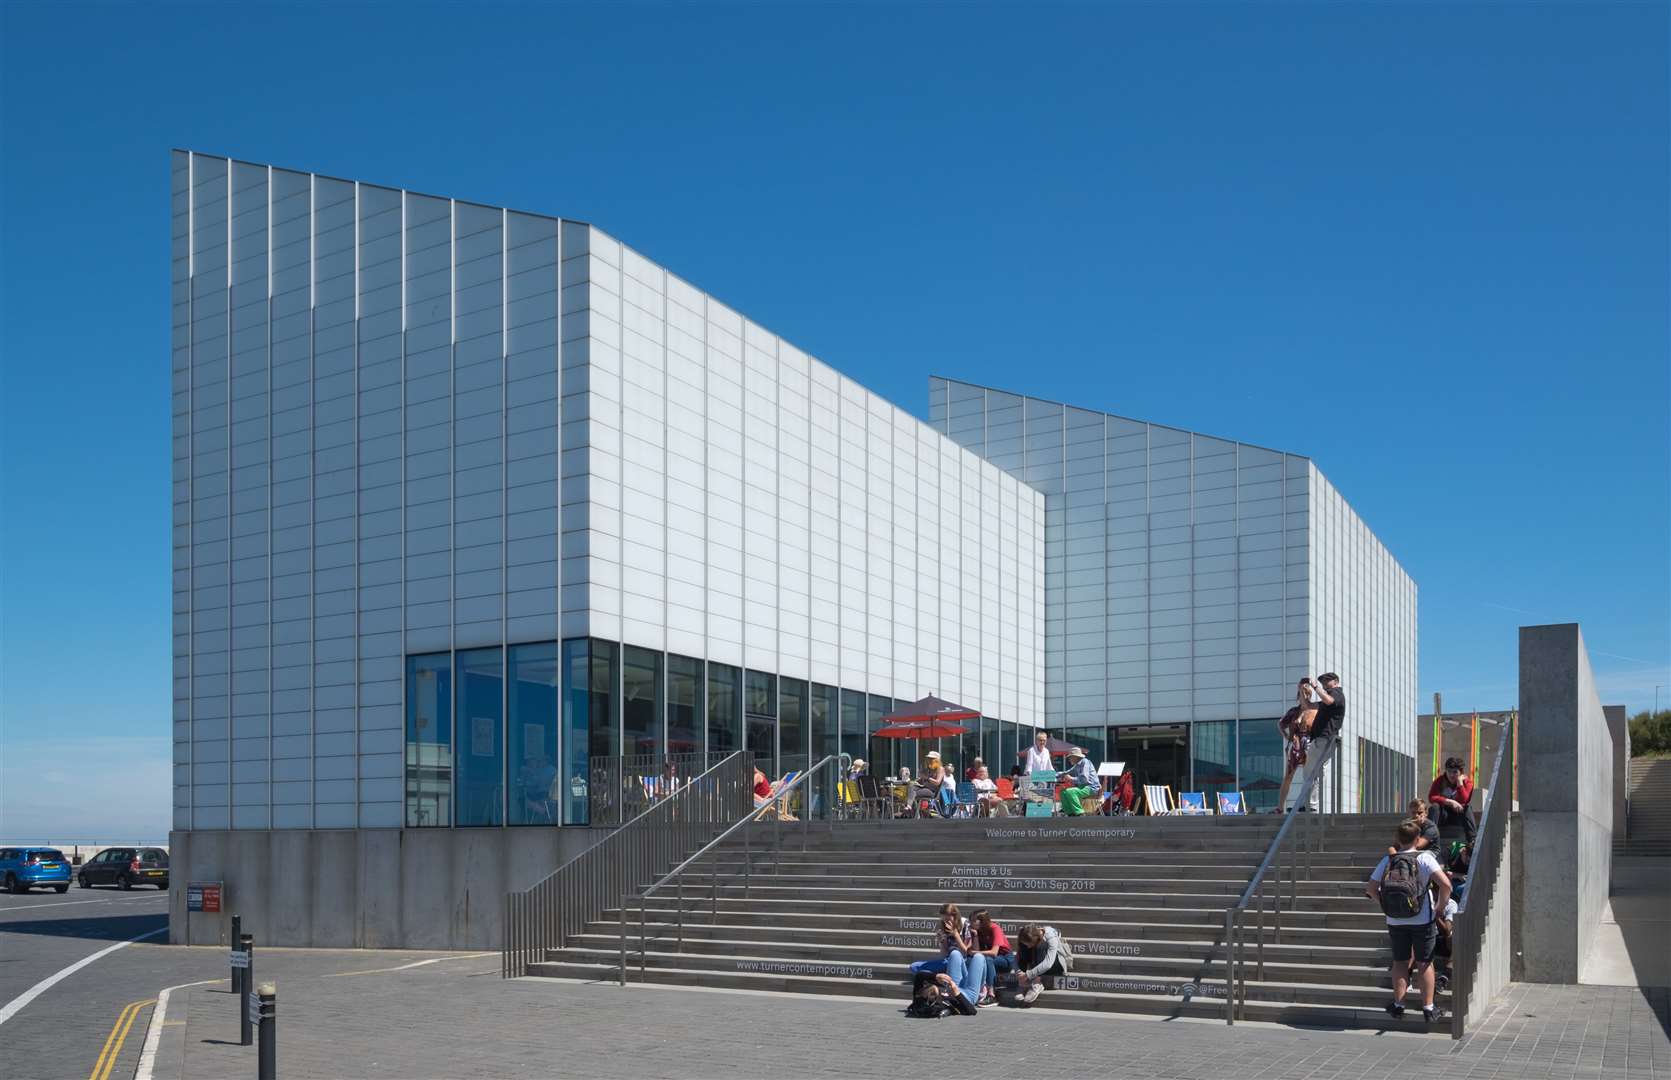 Turner Contemporary in Margate will host the 2019 Turner Prize